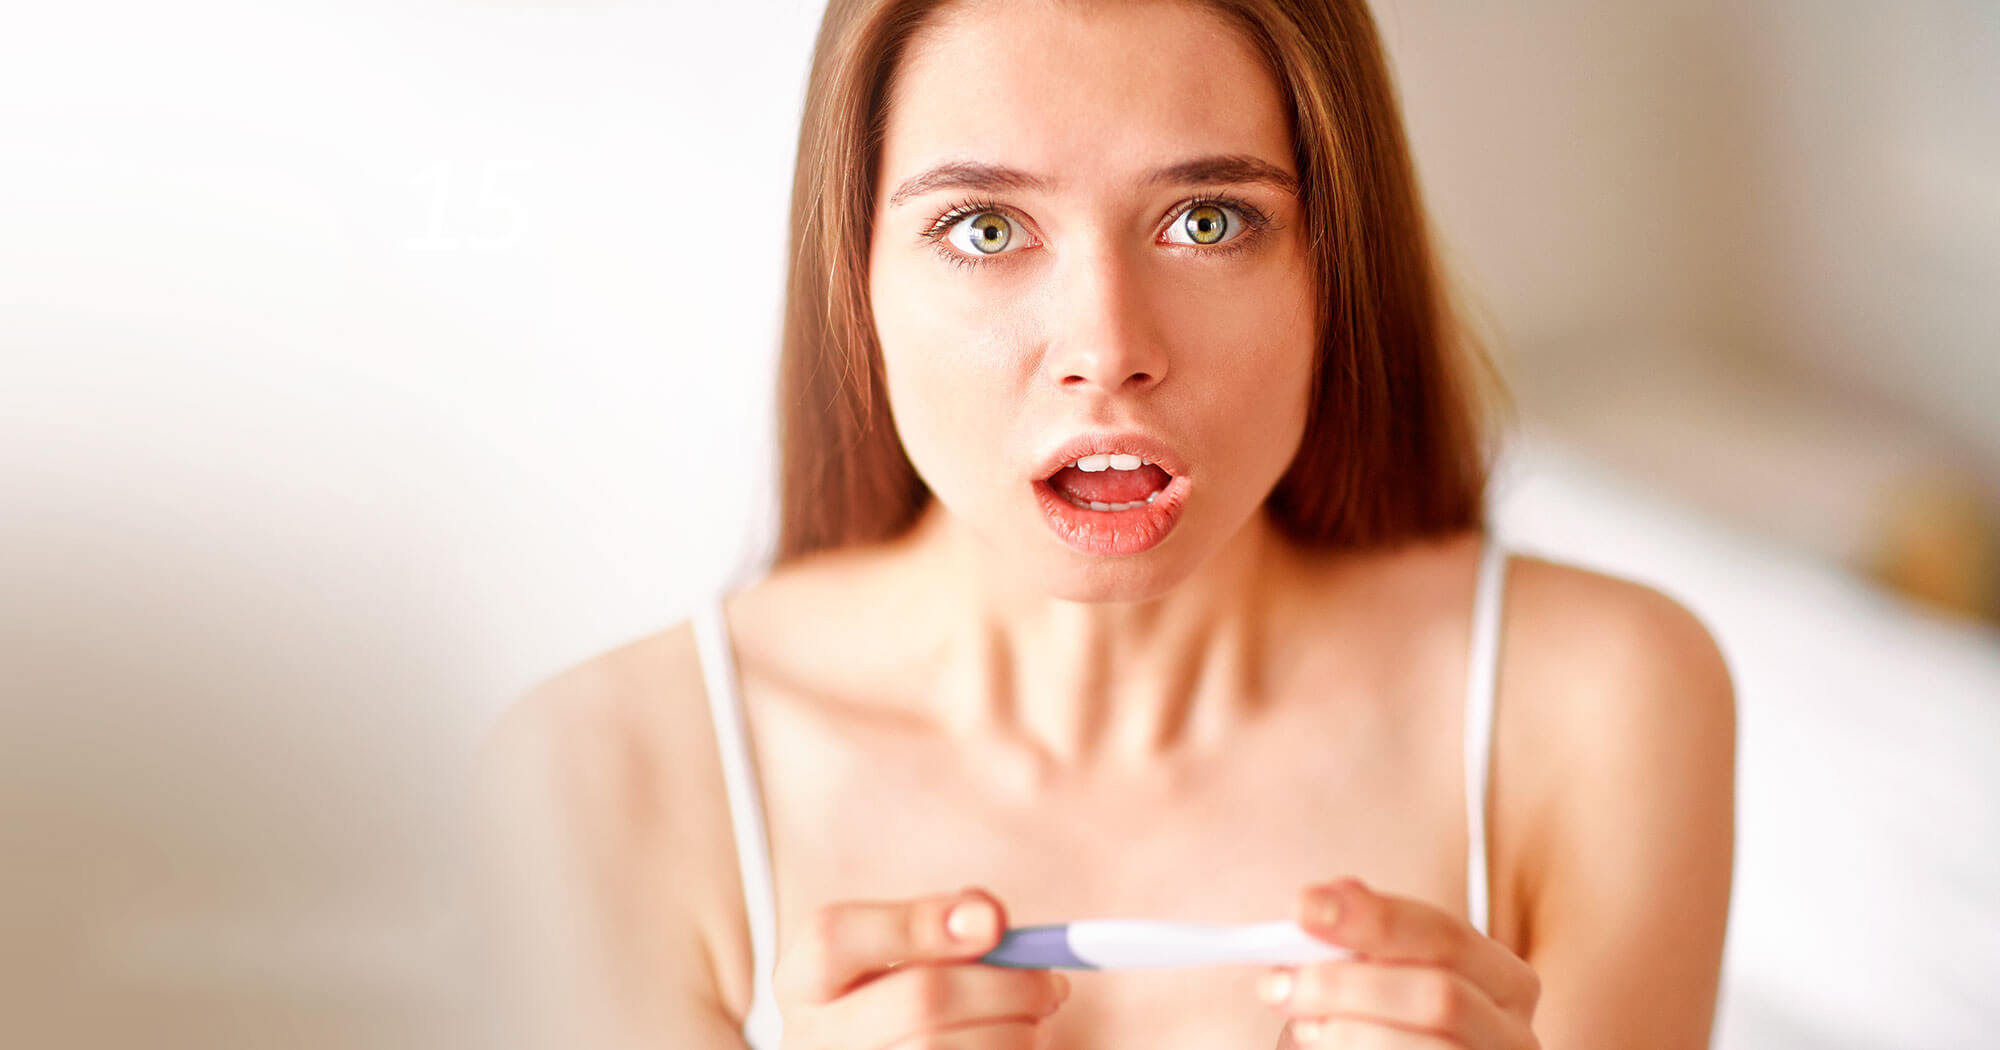 She Might - PMS vs Pregnancy: 12 Signs You Might be Pregnant (+ Chart)